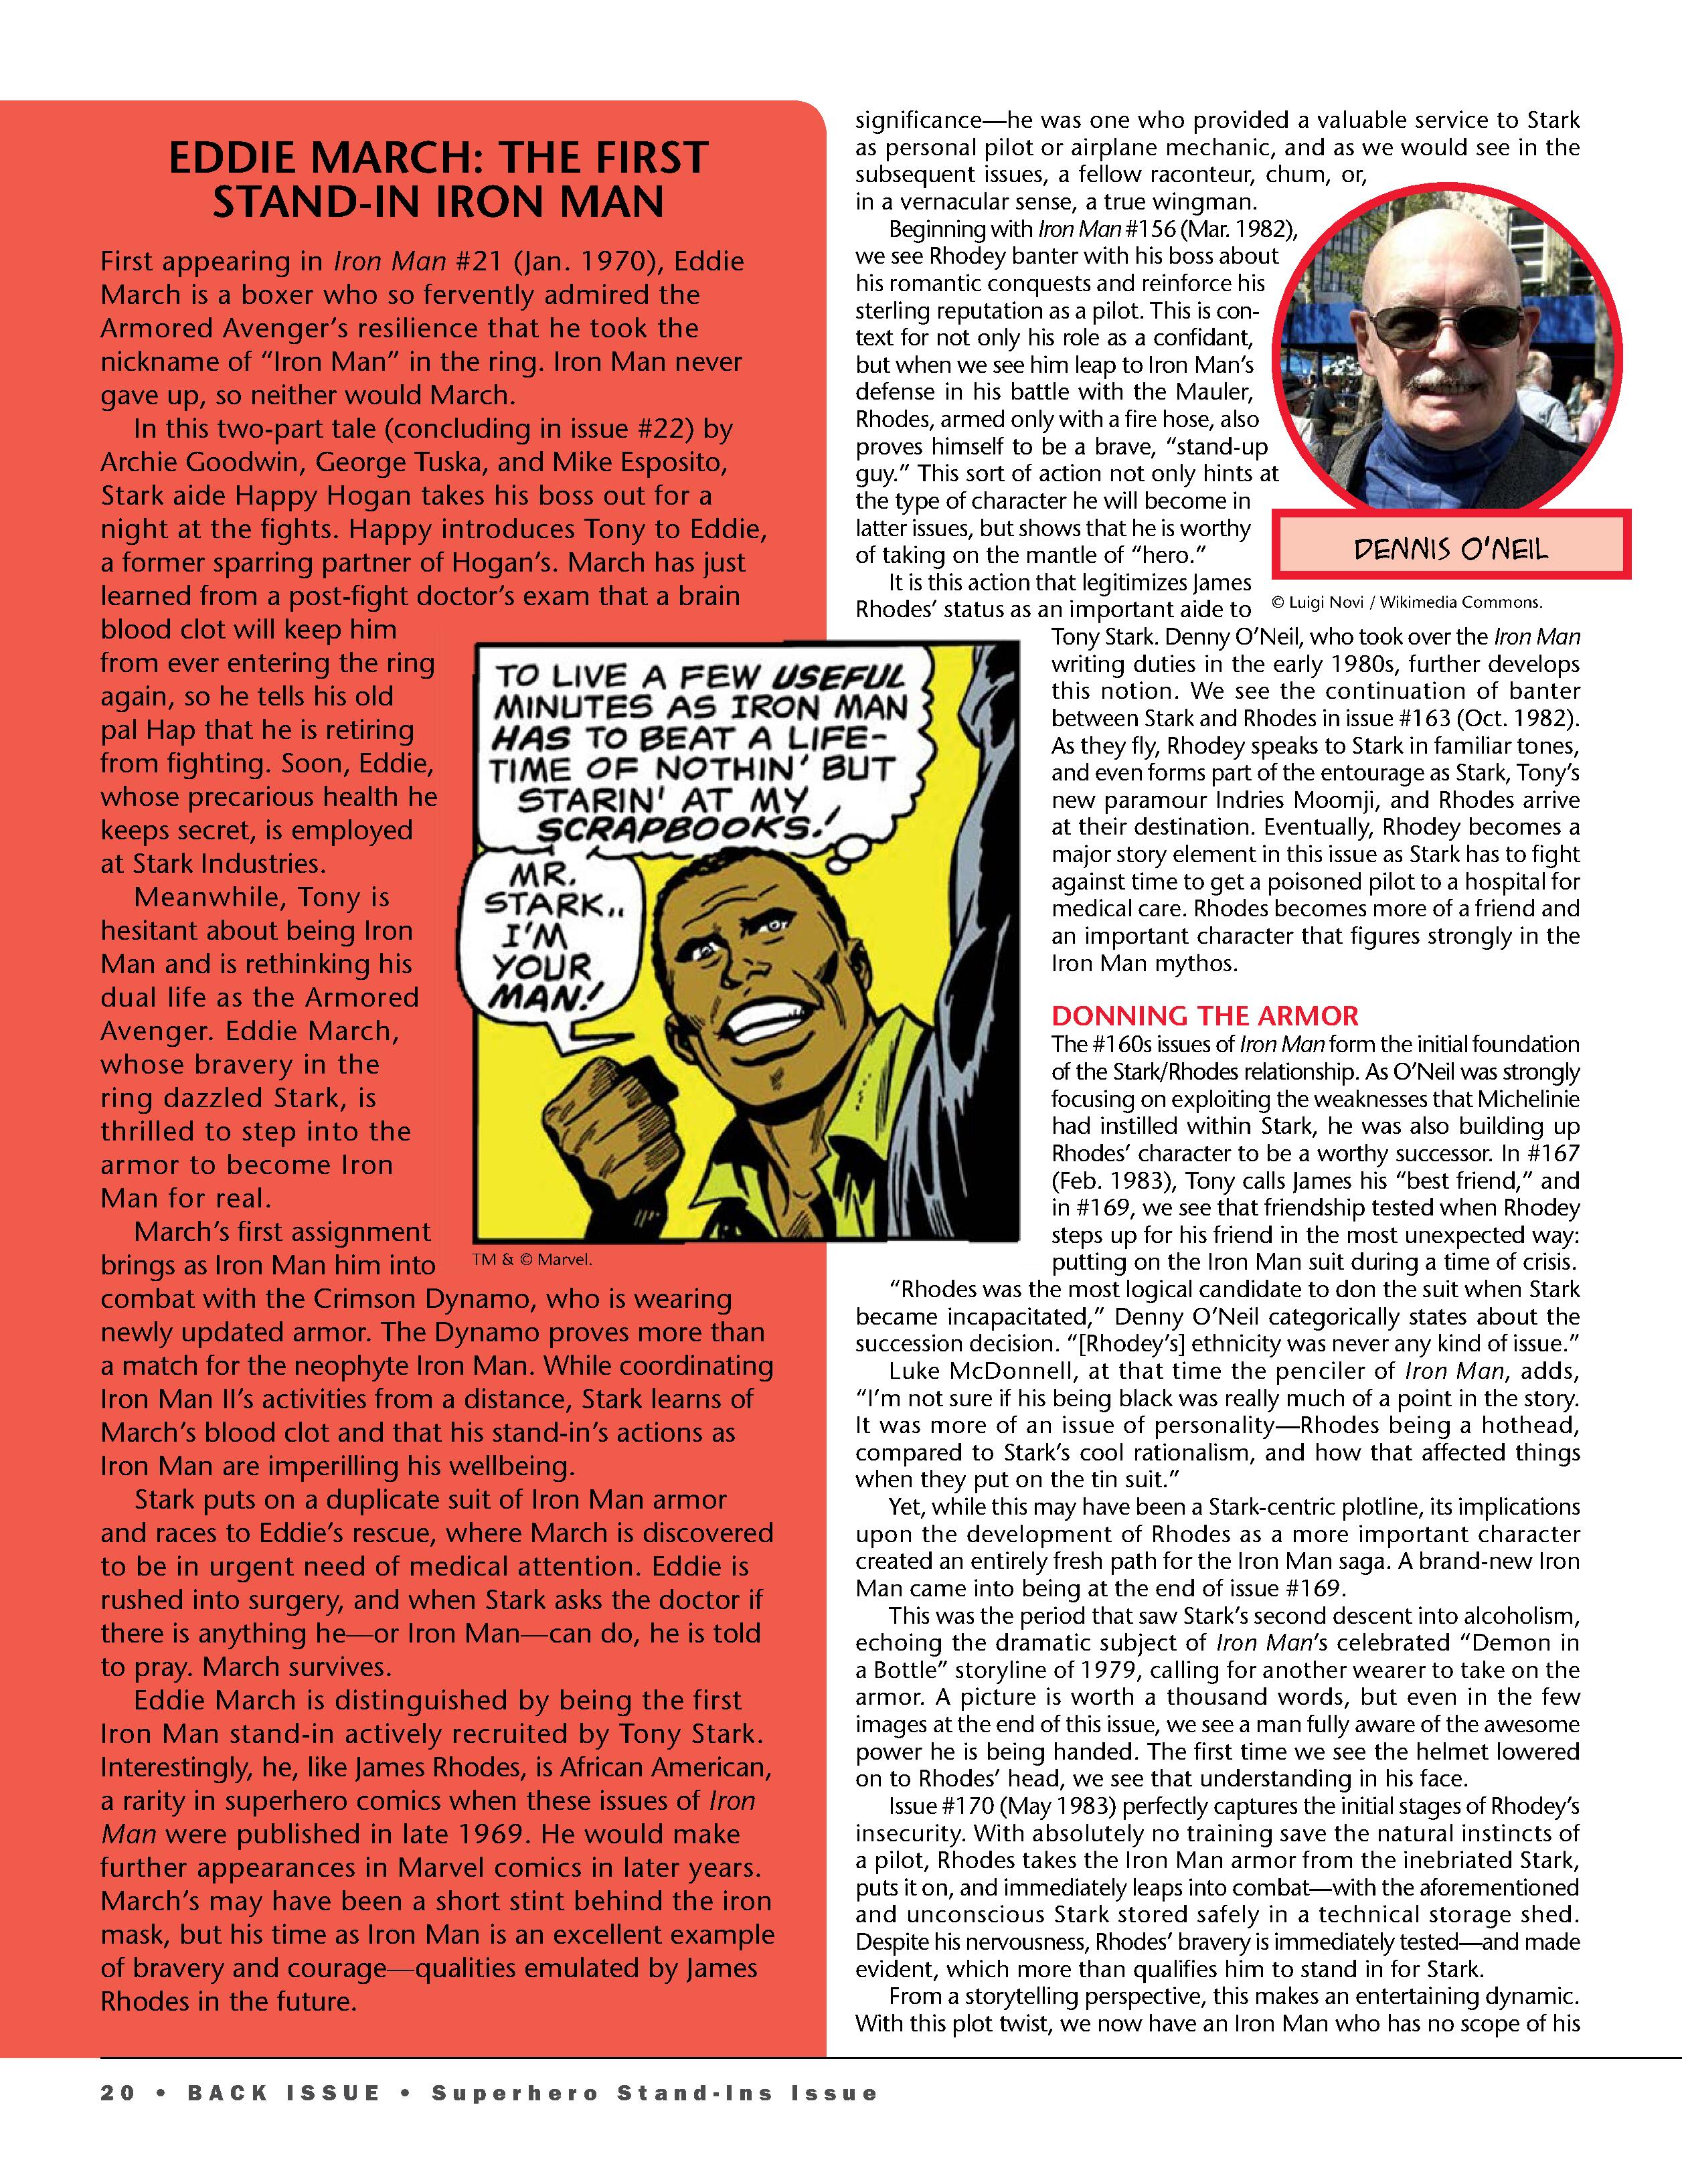 Read online Back Issue comic -  Issue #117 - 22